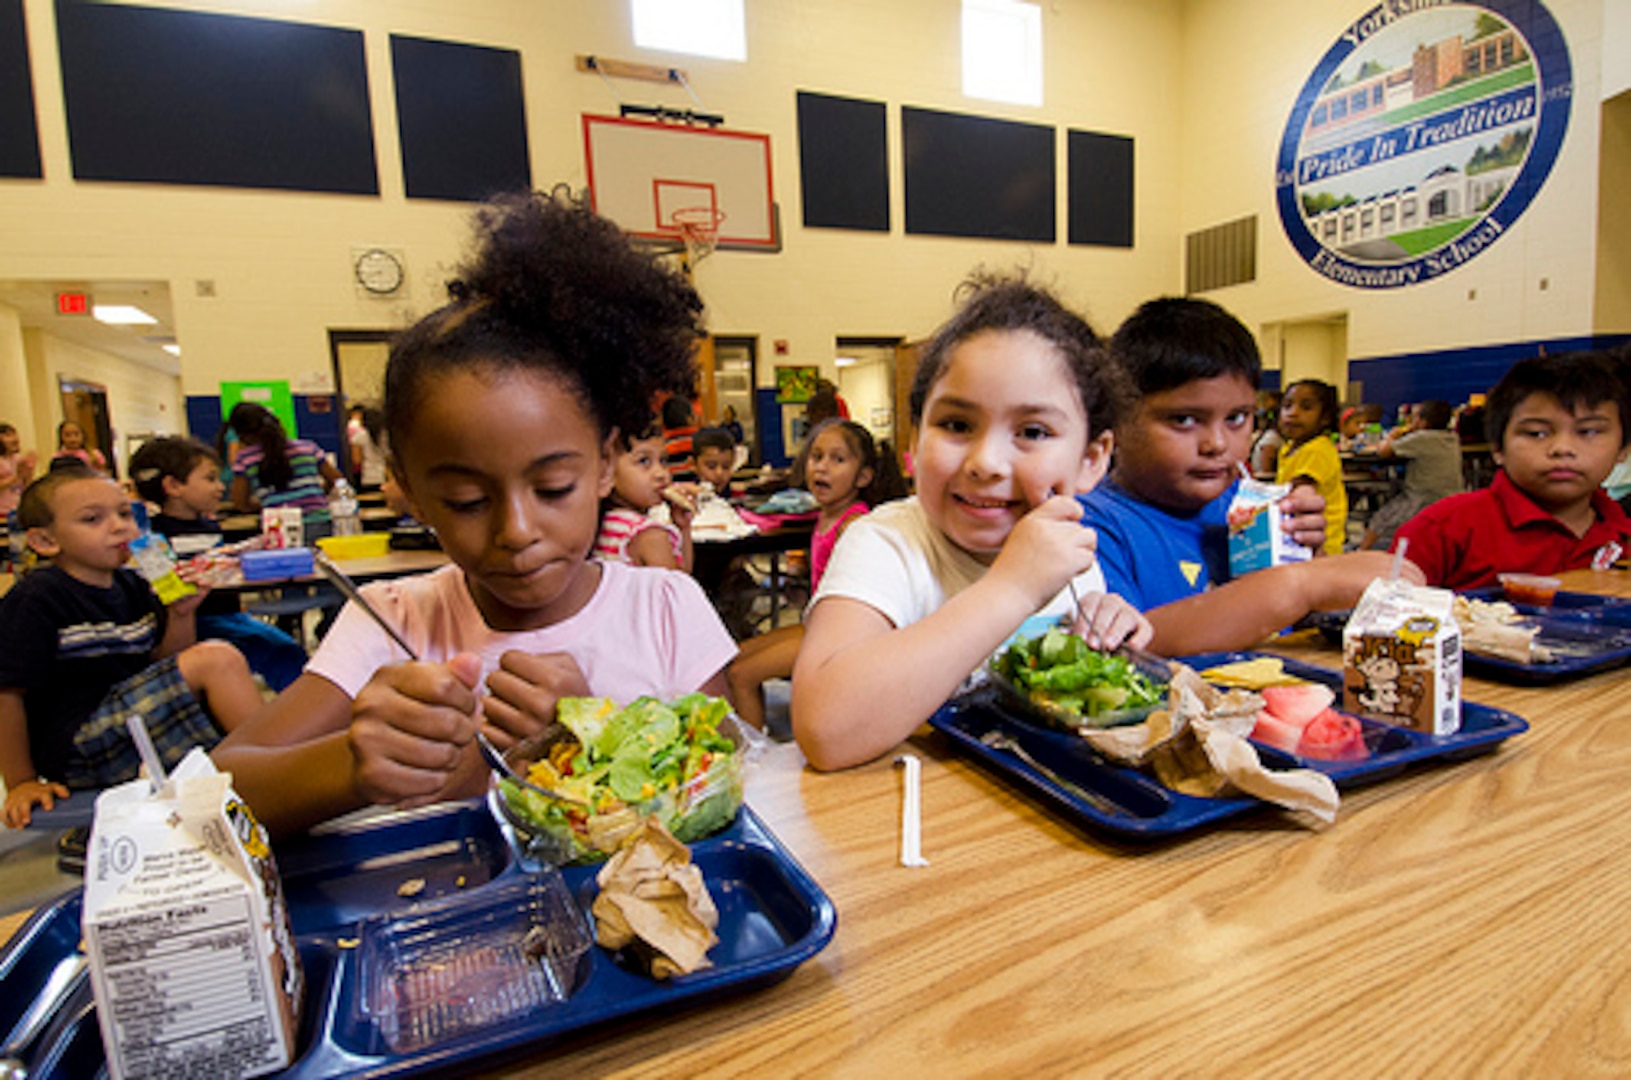 Students enjoy fresh produce provided through the Department of Defense Fresh Fruit and Vegetable Program. The program allows schools to order fresh produce from DLA Troop Support’s Subsistence supply chain using U.S. Department of Agriculture entitlement funds. 